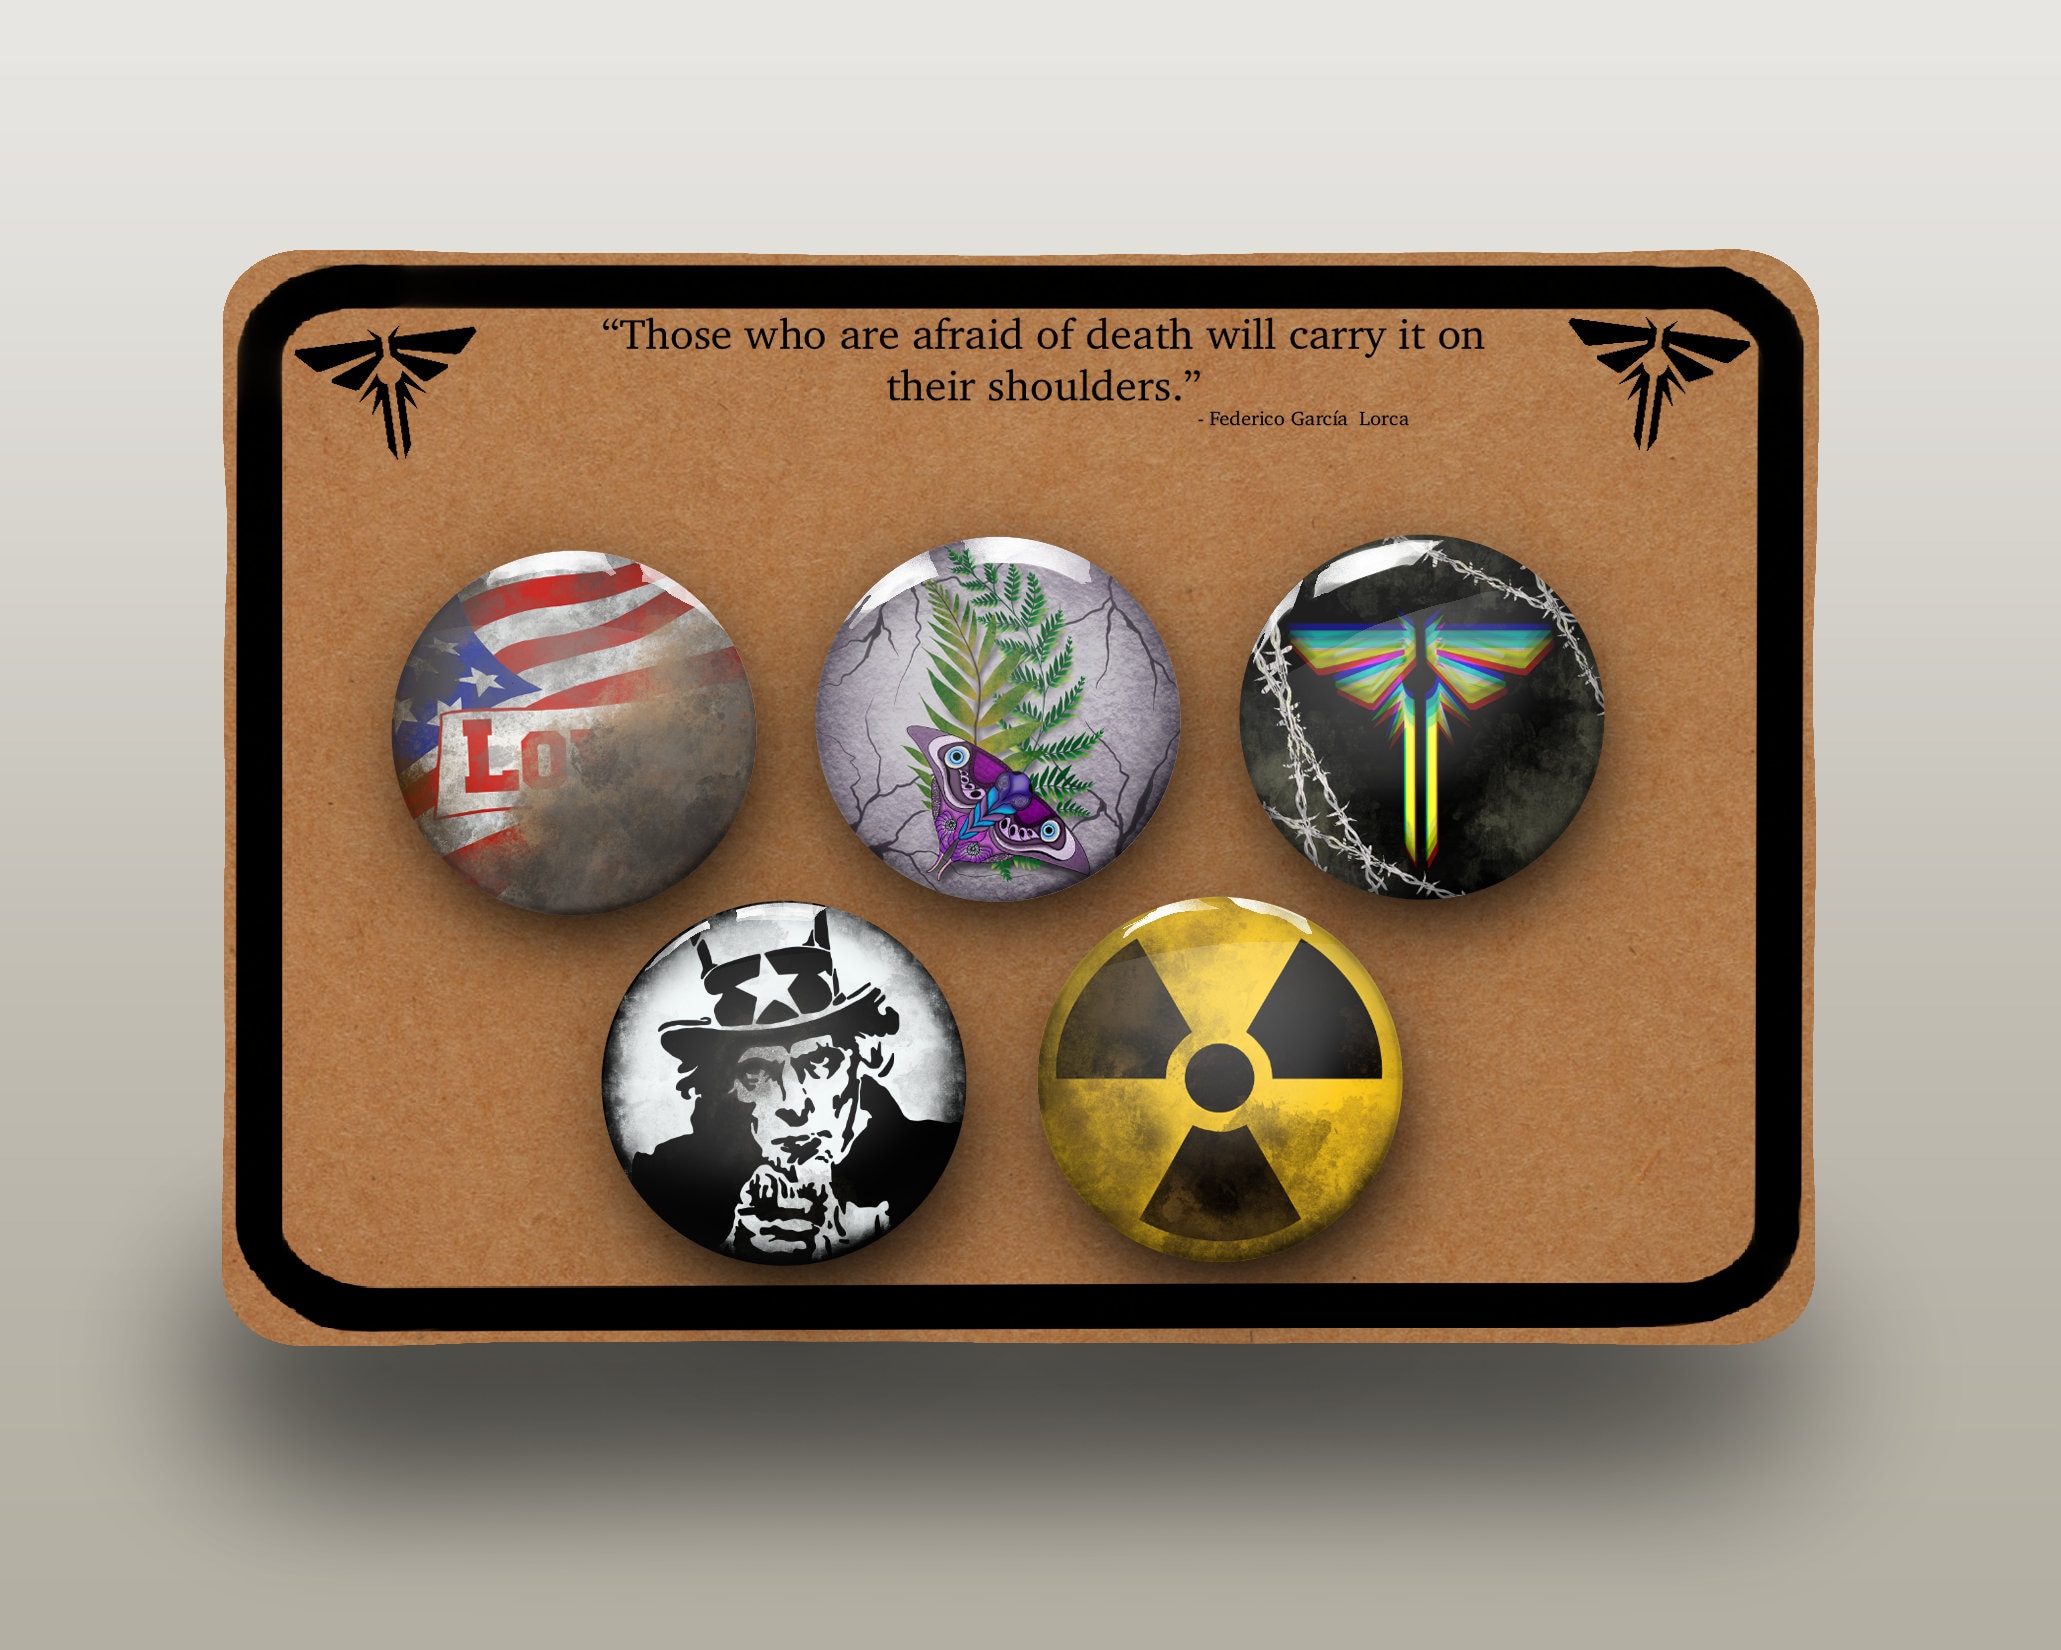 Clickers - The Last Of Us - Pin